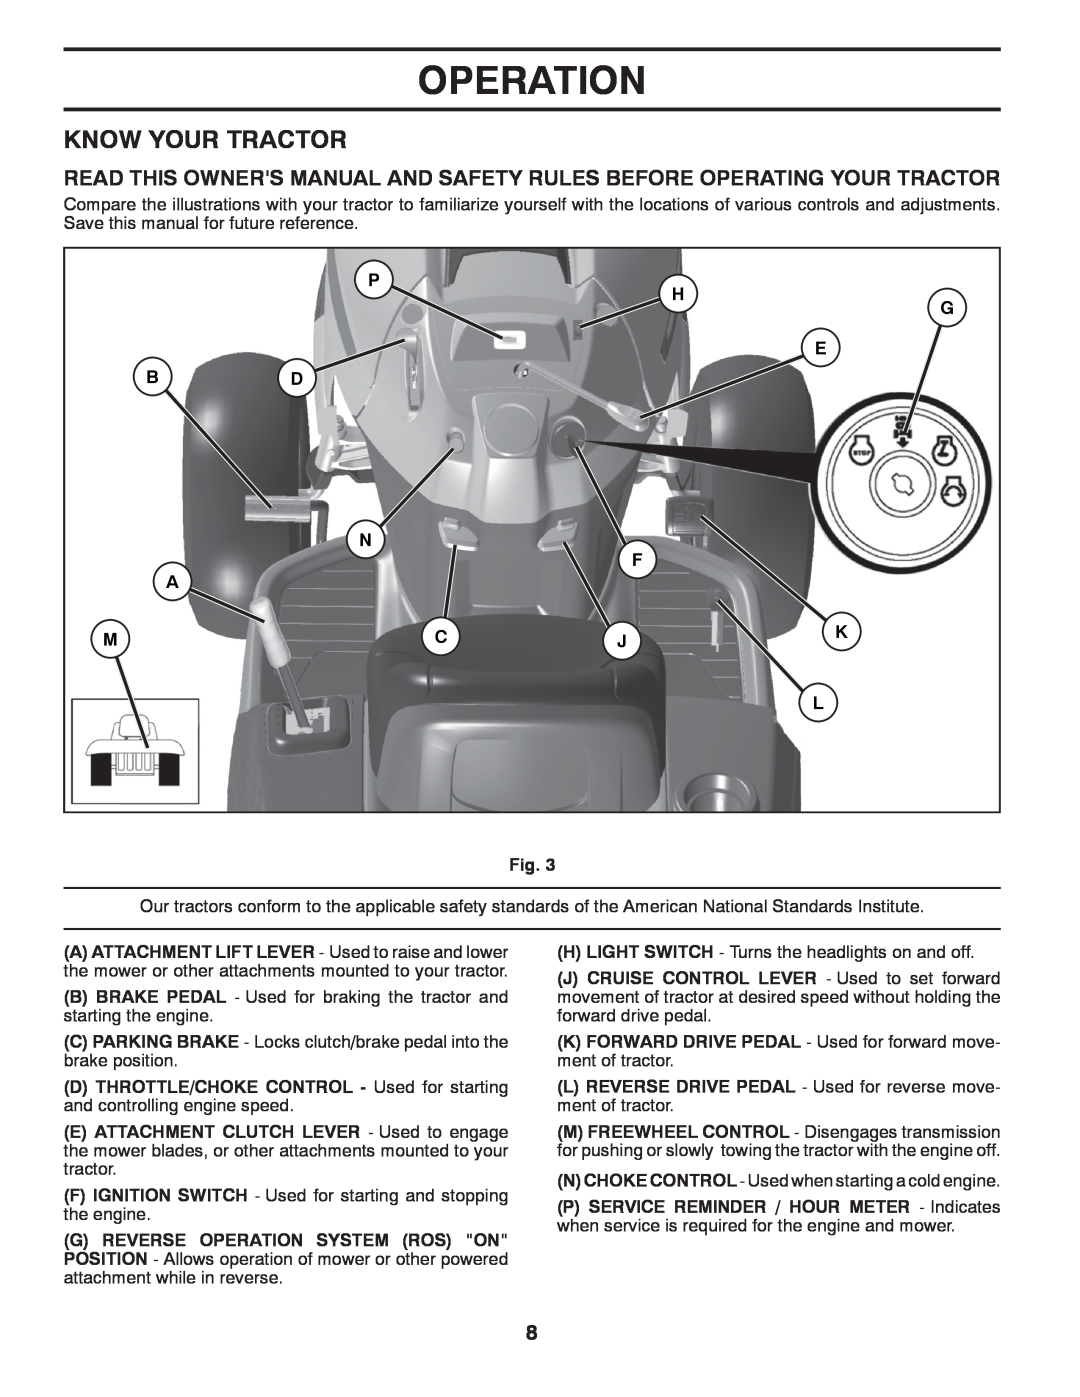 Husqvarna 960430173 owner manual Know Your Tractor, Operation 